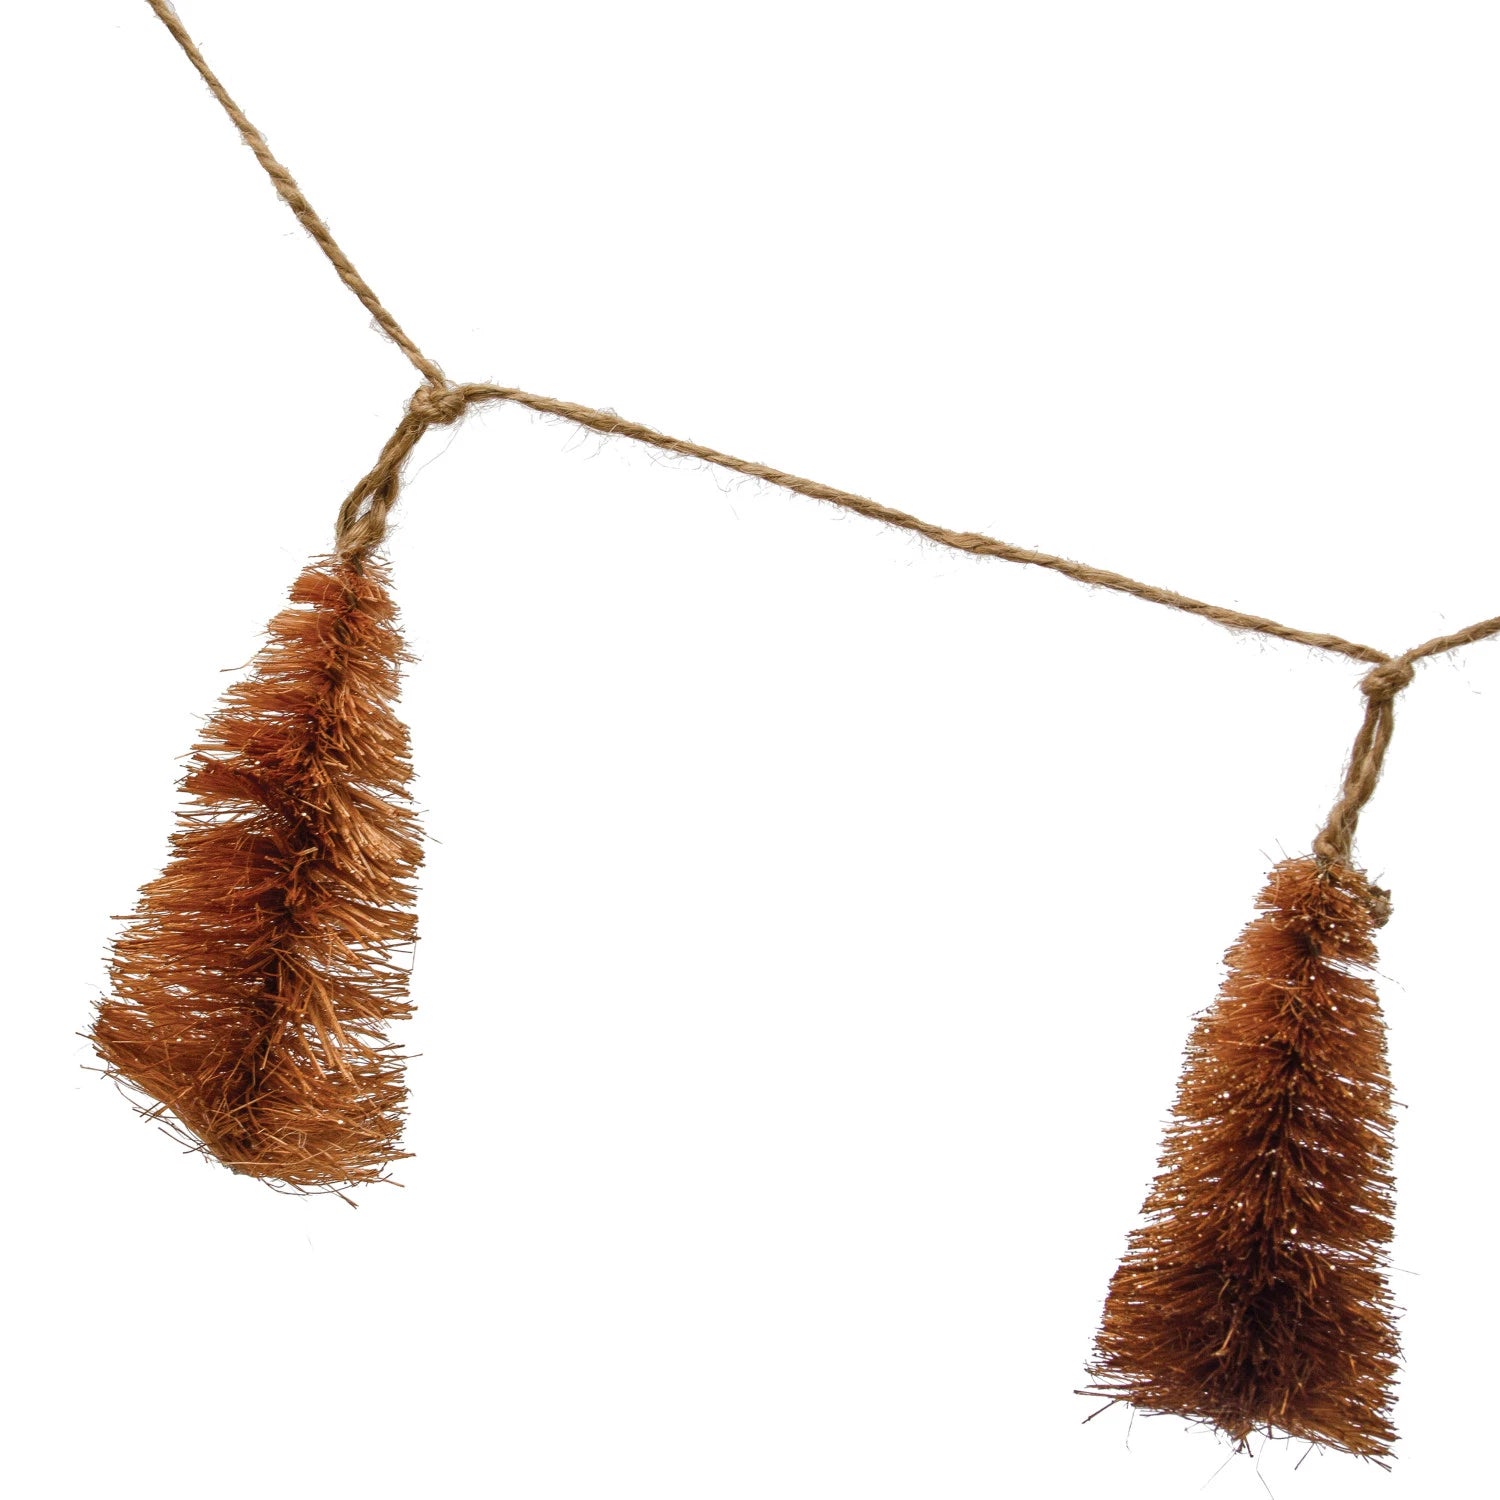 Sisal Bottle Brush Tree Garland with Jute Cord, Brown Ombré - 60"L